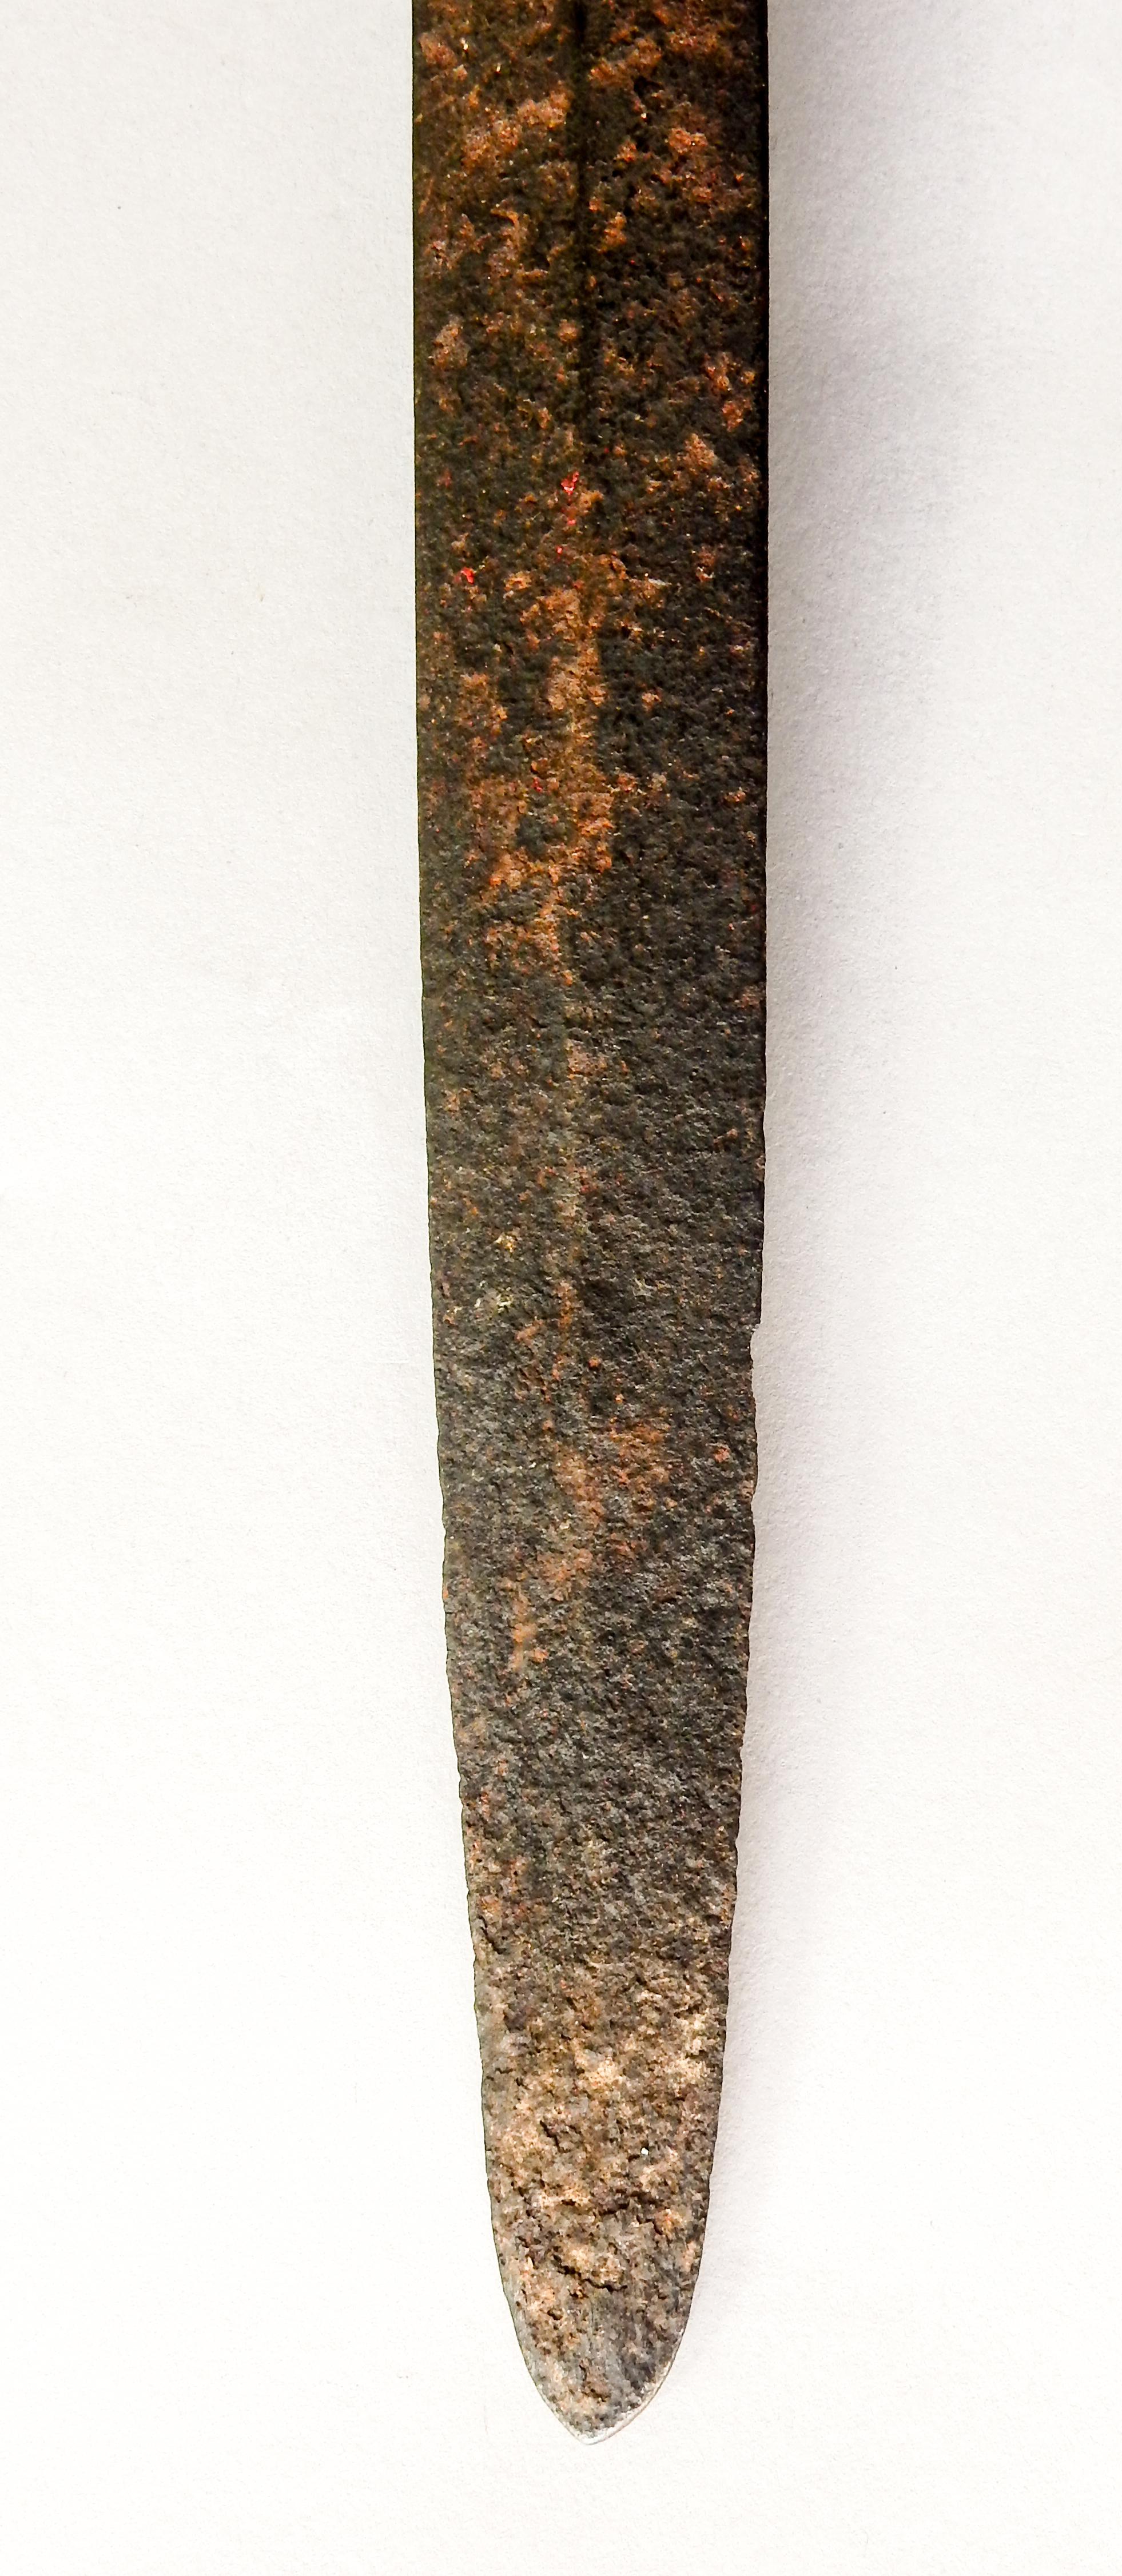 Yao Ritual Dagger Iron with Coins and Silver Banding Vietnam, Early 20th Century 2